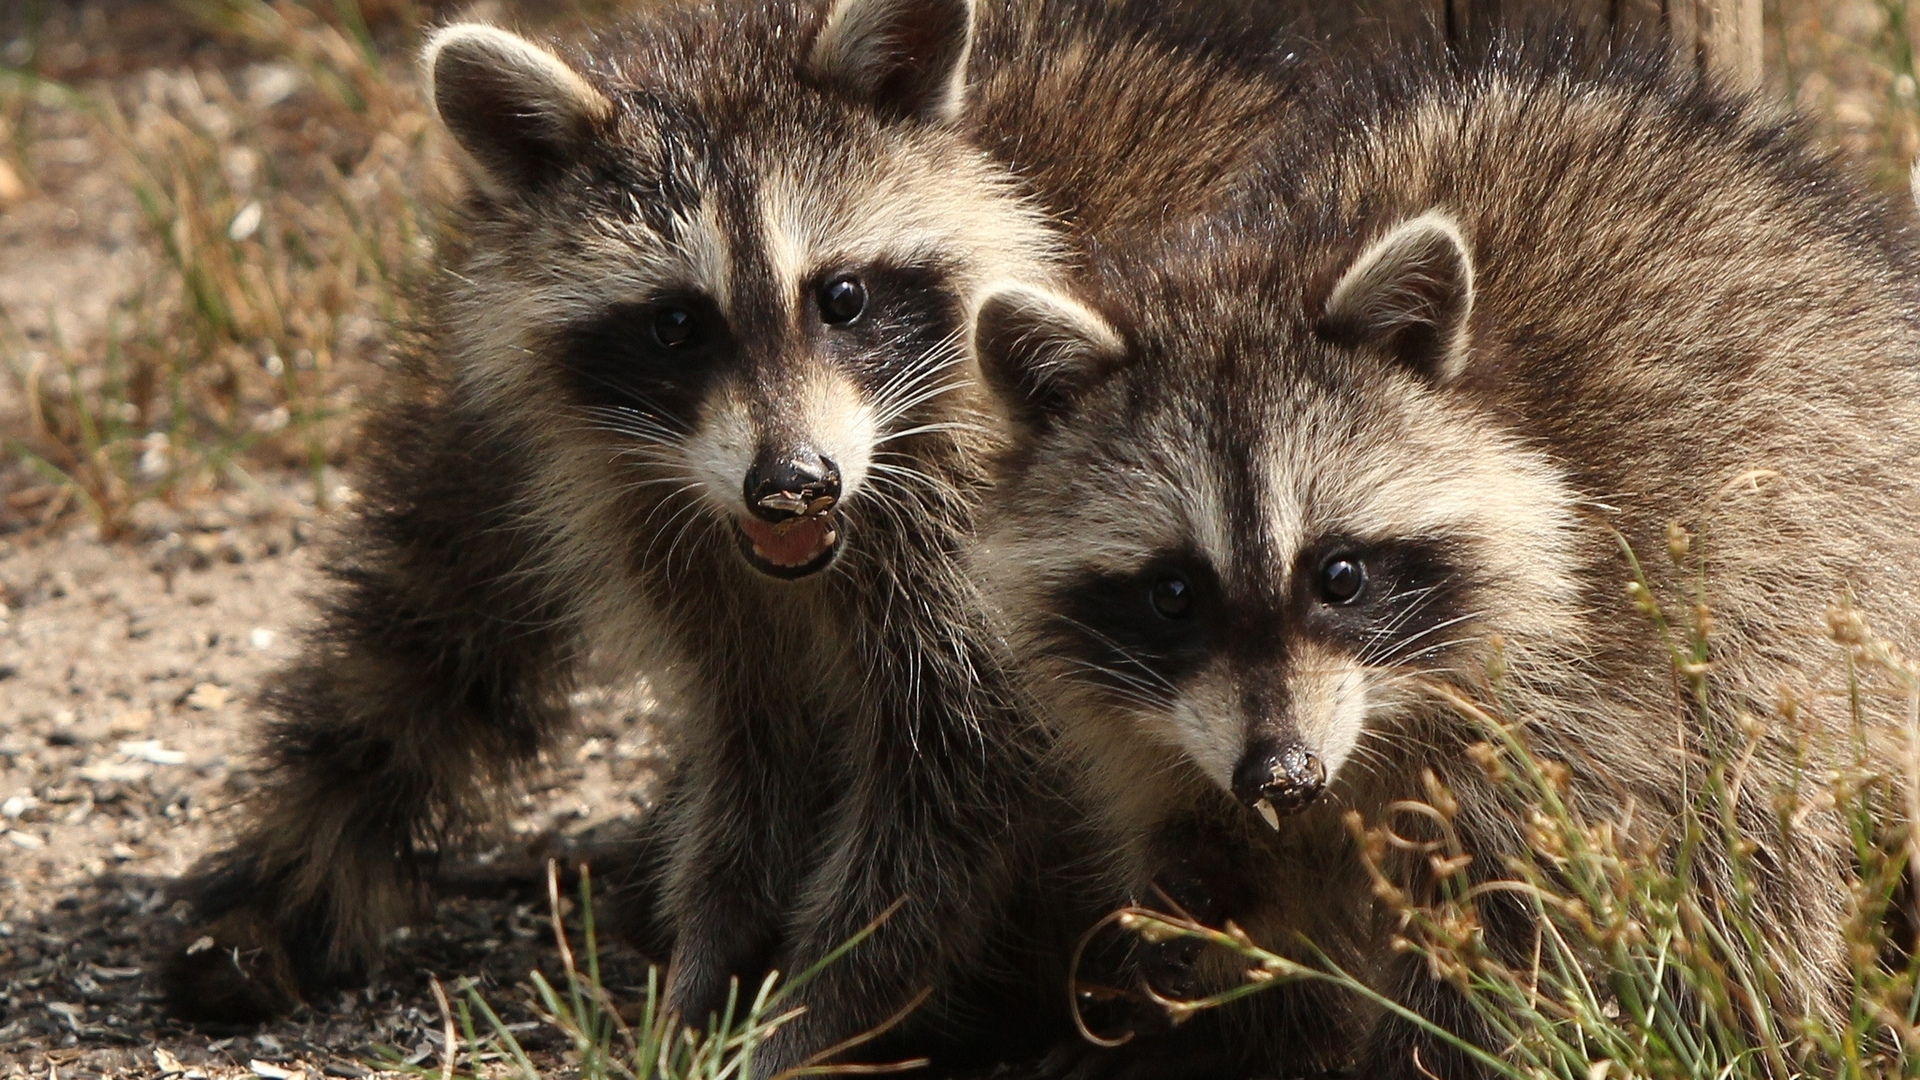 Two Raccoons for 1920 x 1080 HDTV 1080p resolution